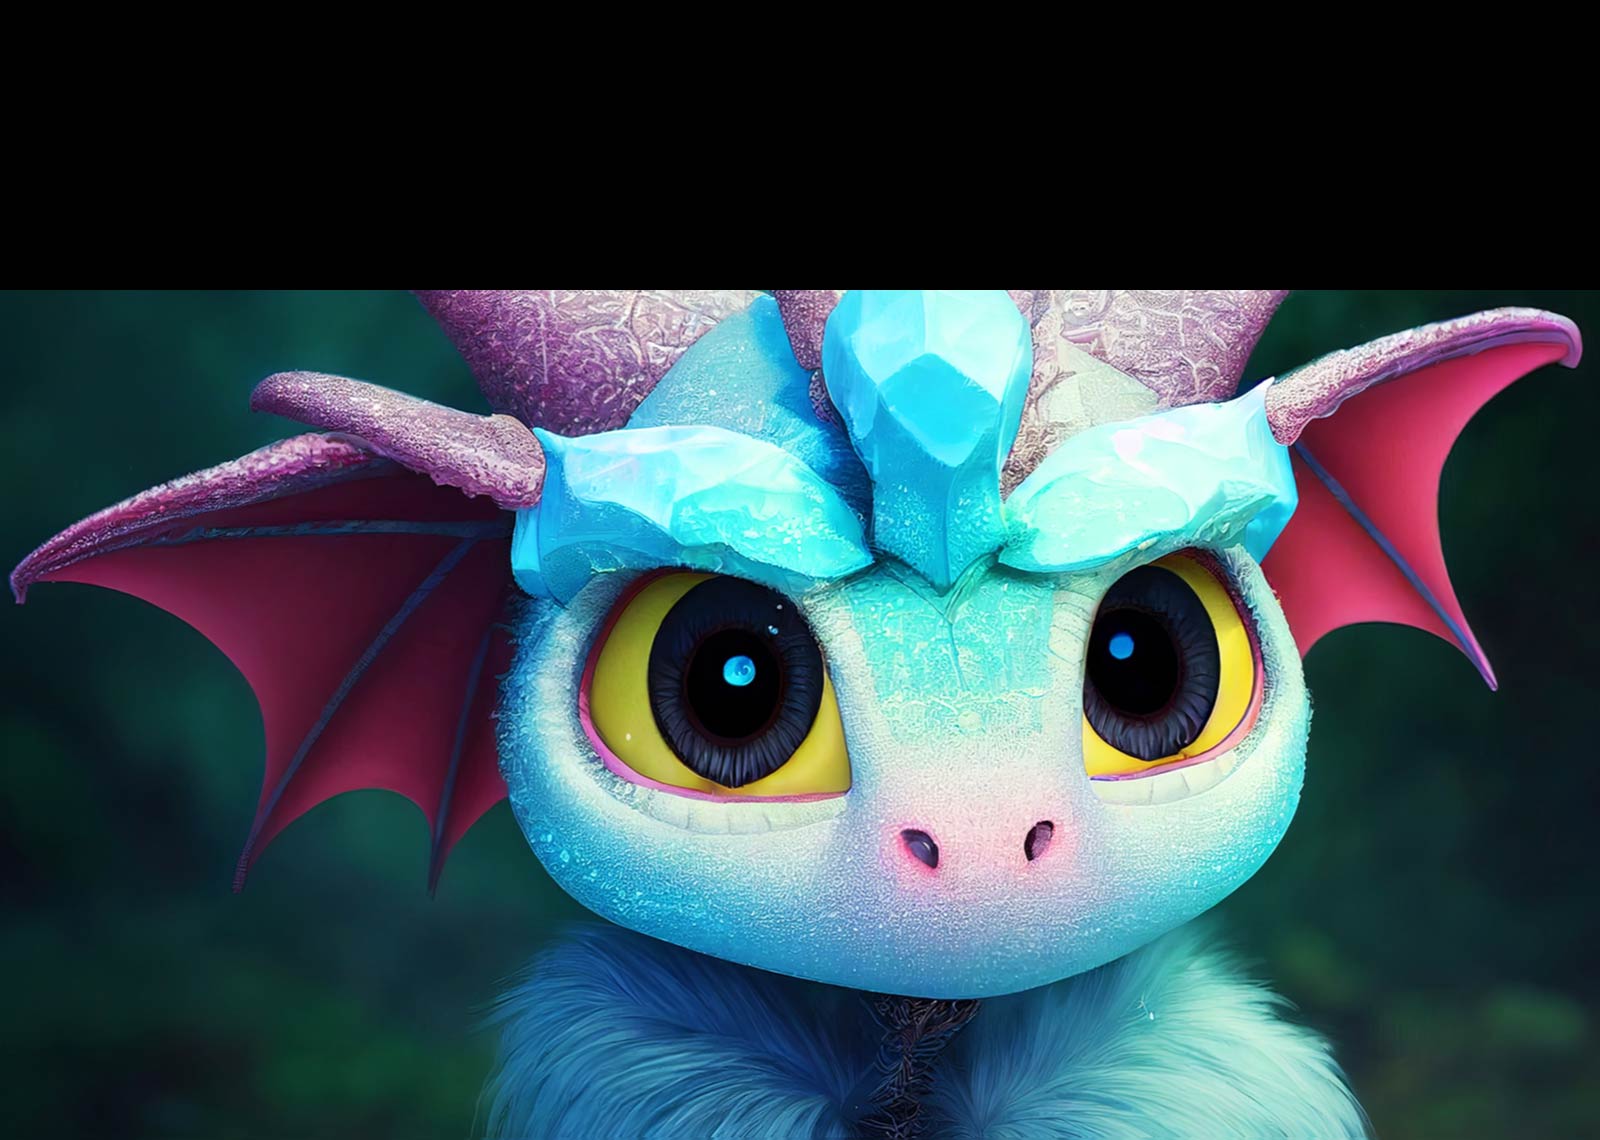 A video shows a gallery featuring images of a cartoon dragon with differing contrast, brightness, color, etc. Two images are selected and then merged to create a personalized image settings profile.